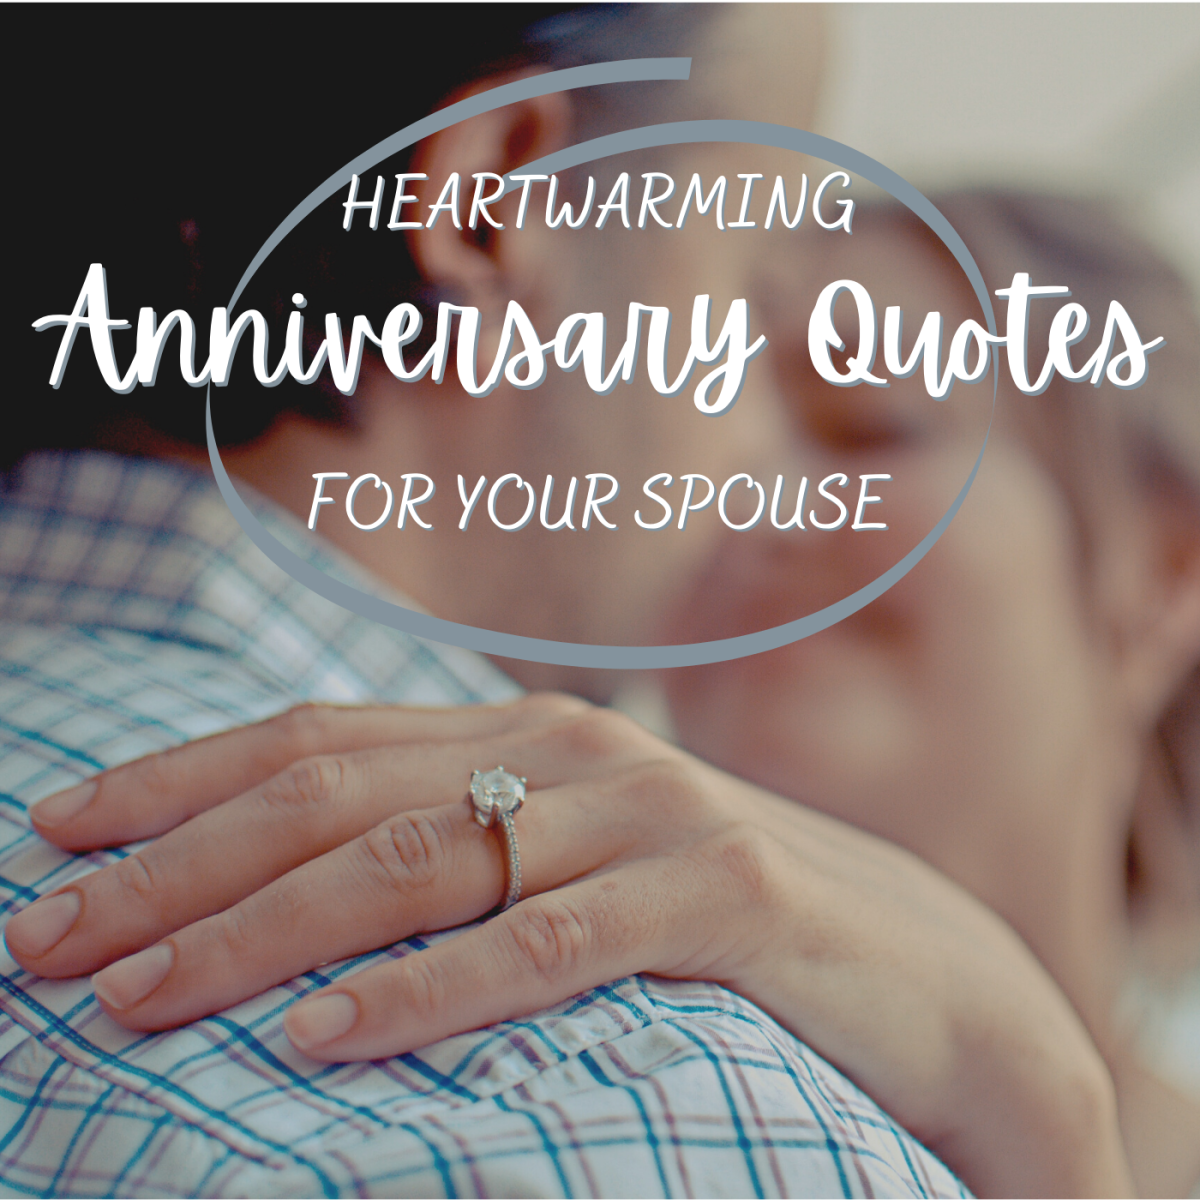 Find the right words to express how much you appreciate your spouse.